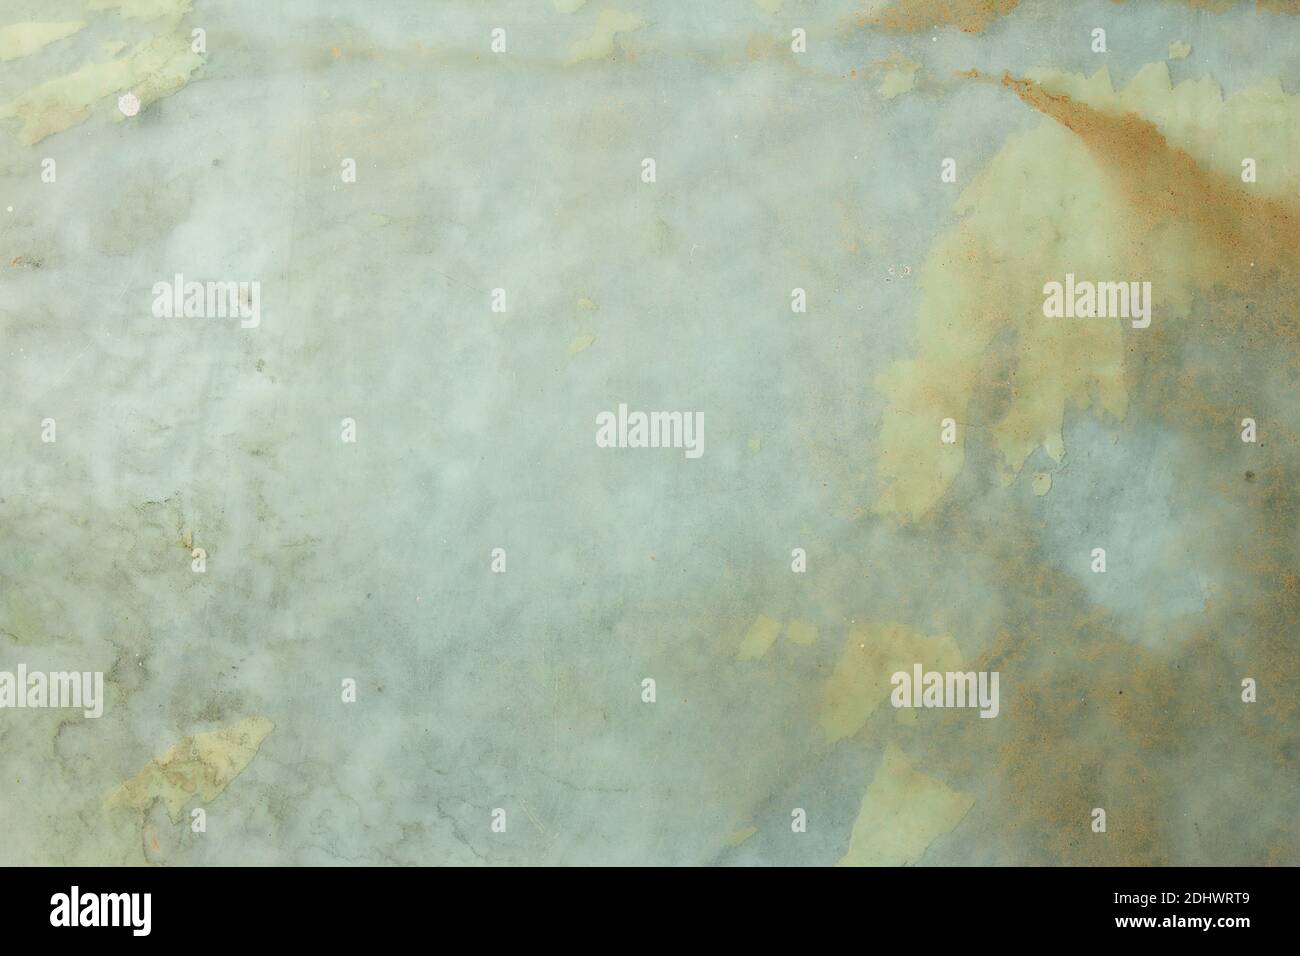 Dirty glass background with traces of glued paper. Grunge texture. Stock Photo